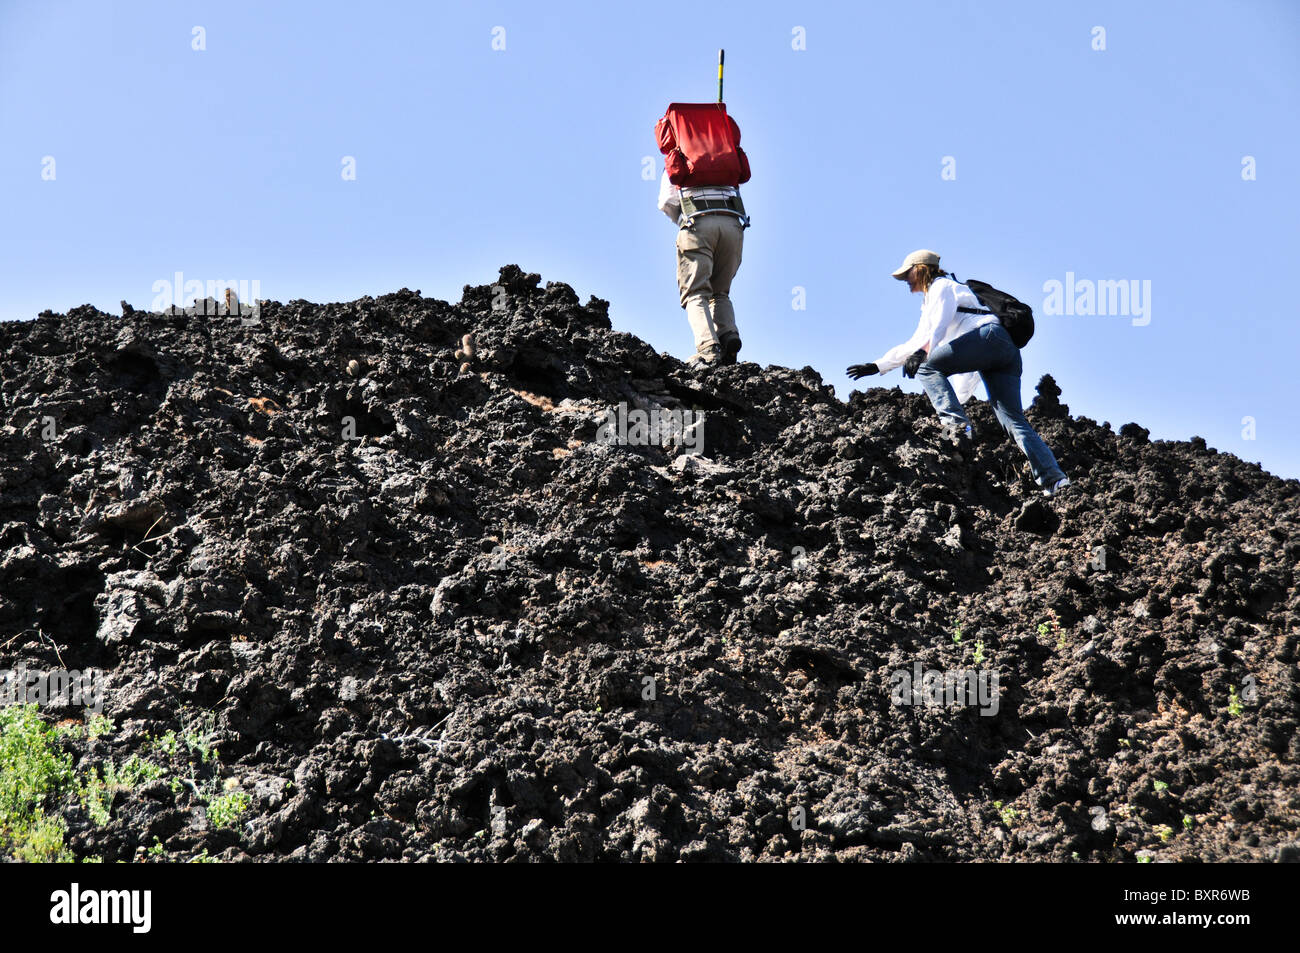 Hikers climbing rugged lava flow on side of Tecolote cinder cone, El Pinacate Biosphere Reserve, Sonora, Mexico Stock Photo